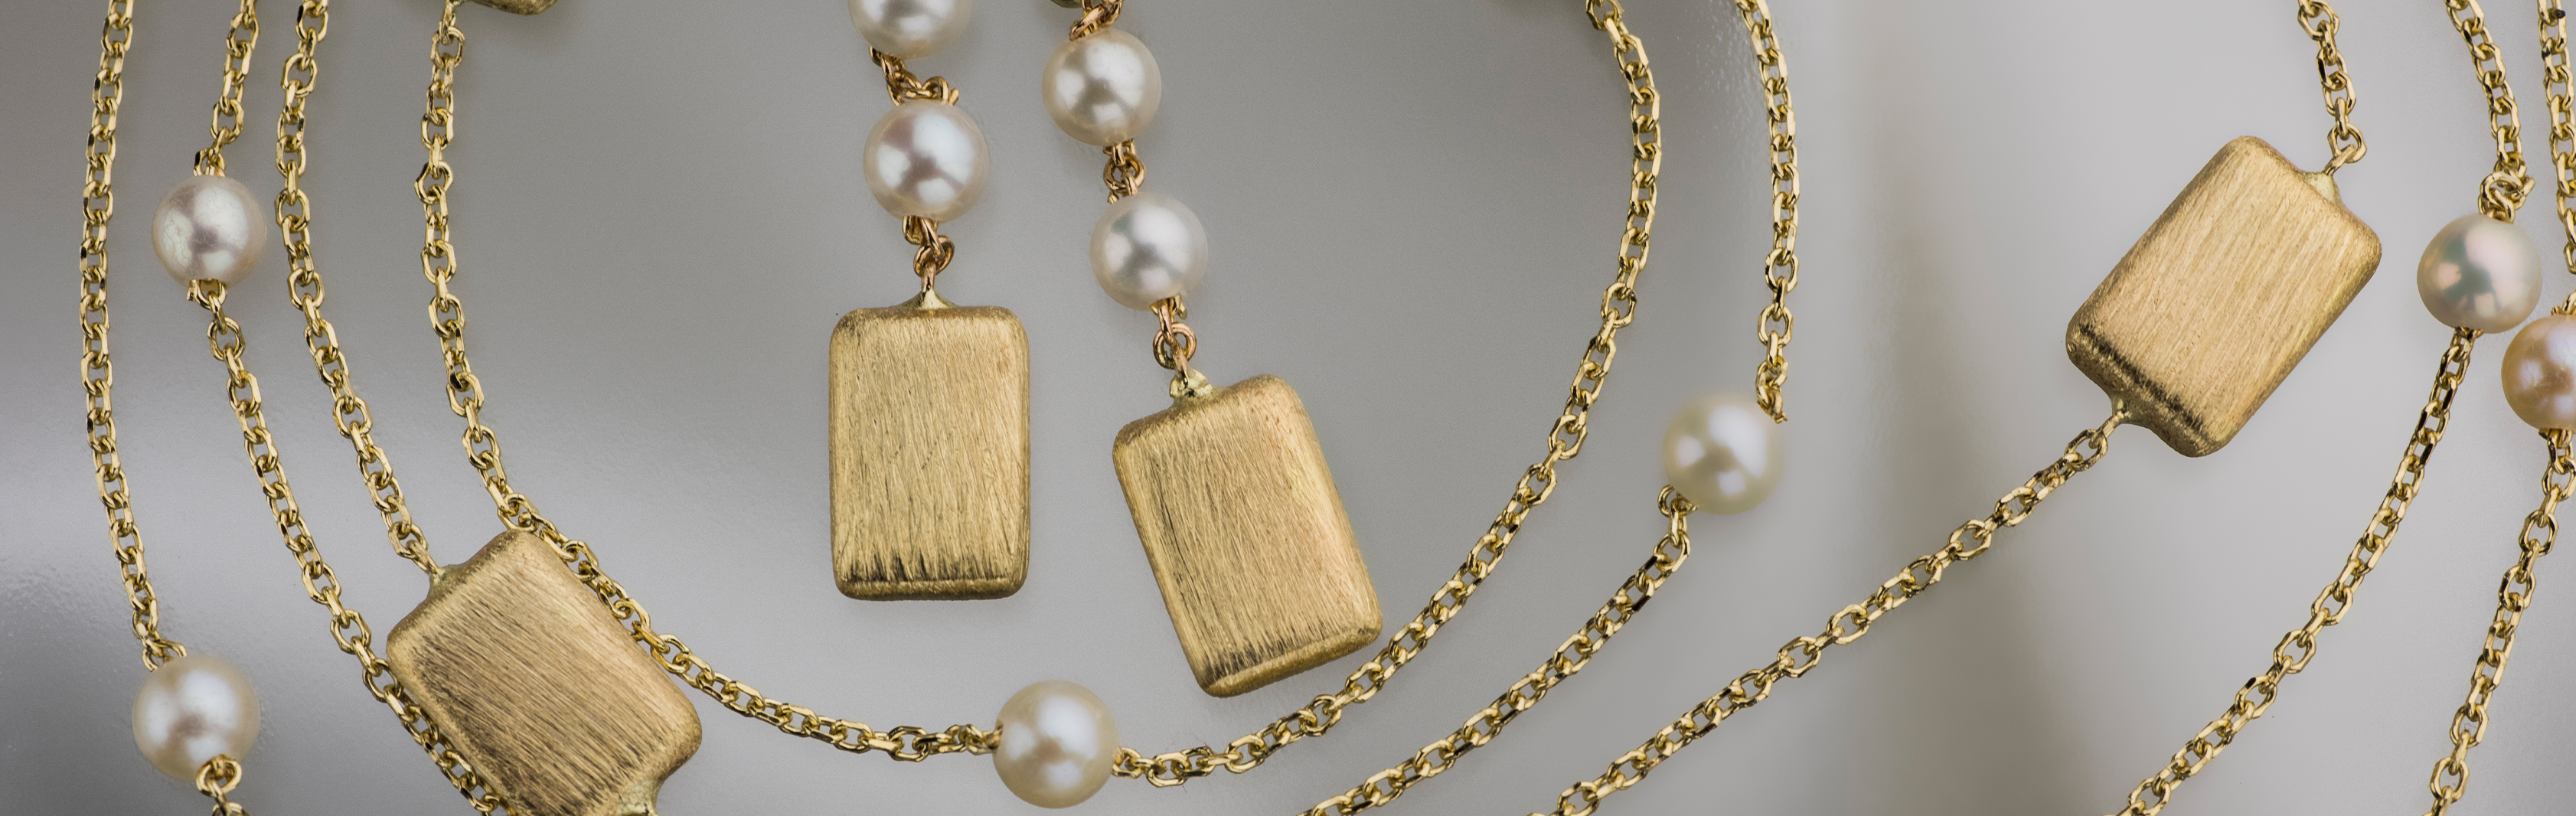 Classic Combination Collection | 14K Gold Matte Finish Jewelry with Pearls